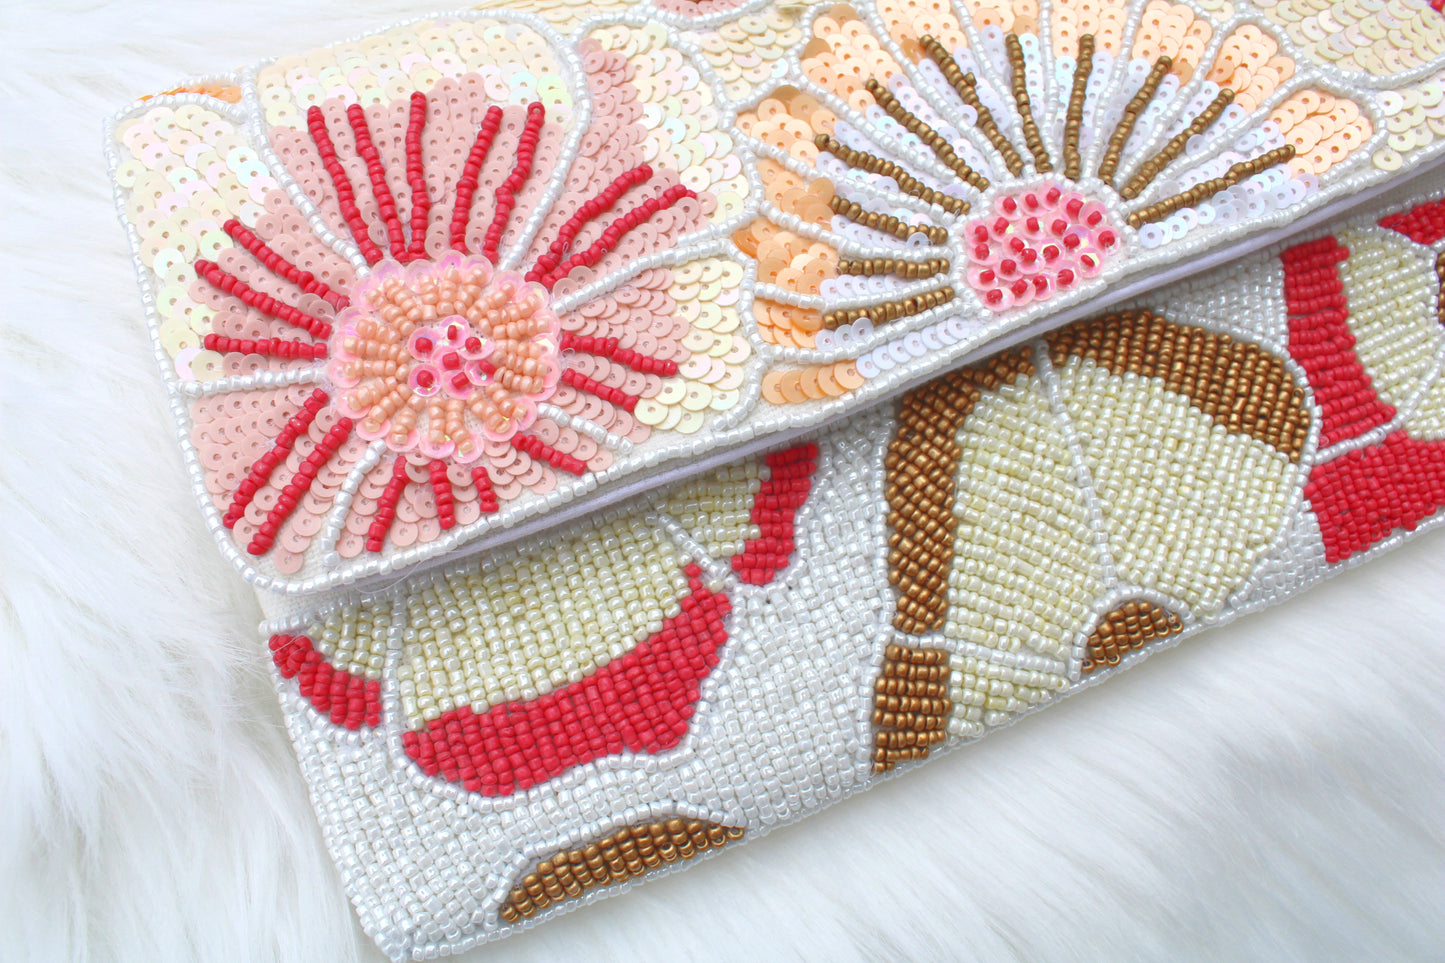 Take Me To Paradise Beaded Clutch